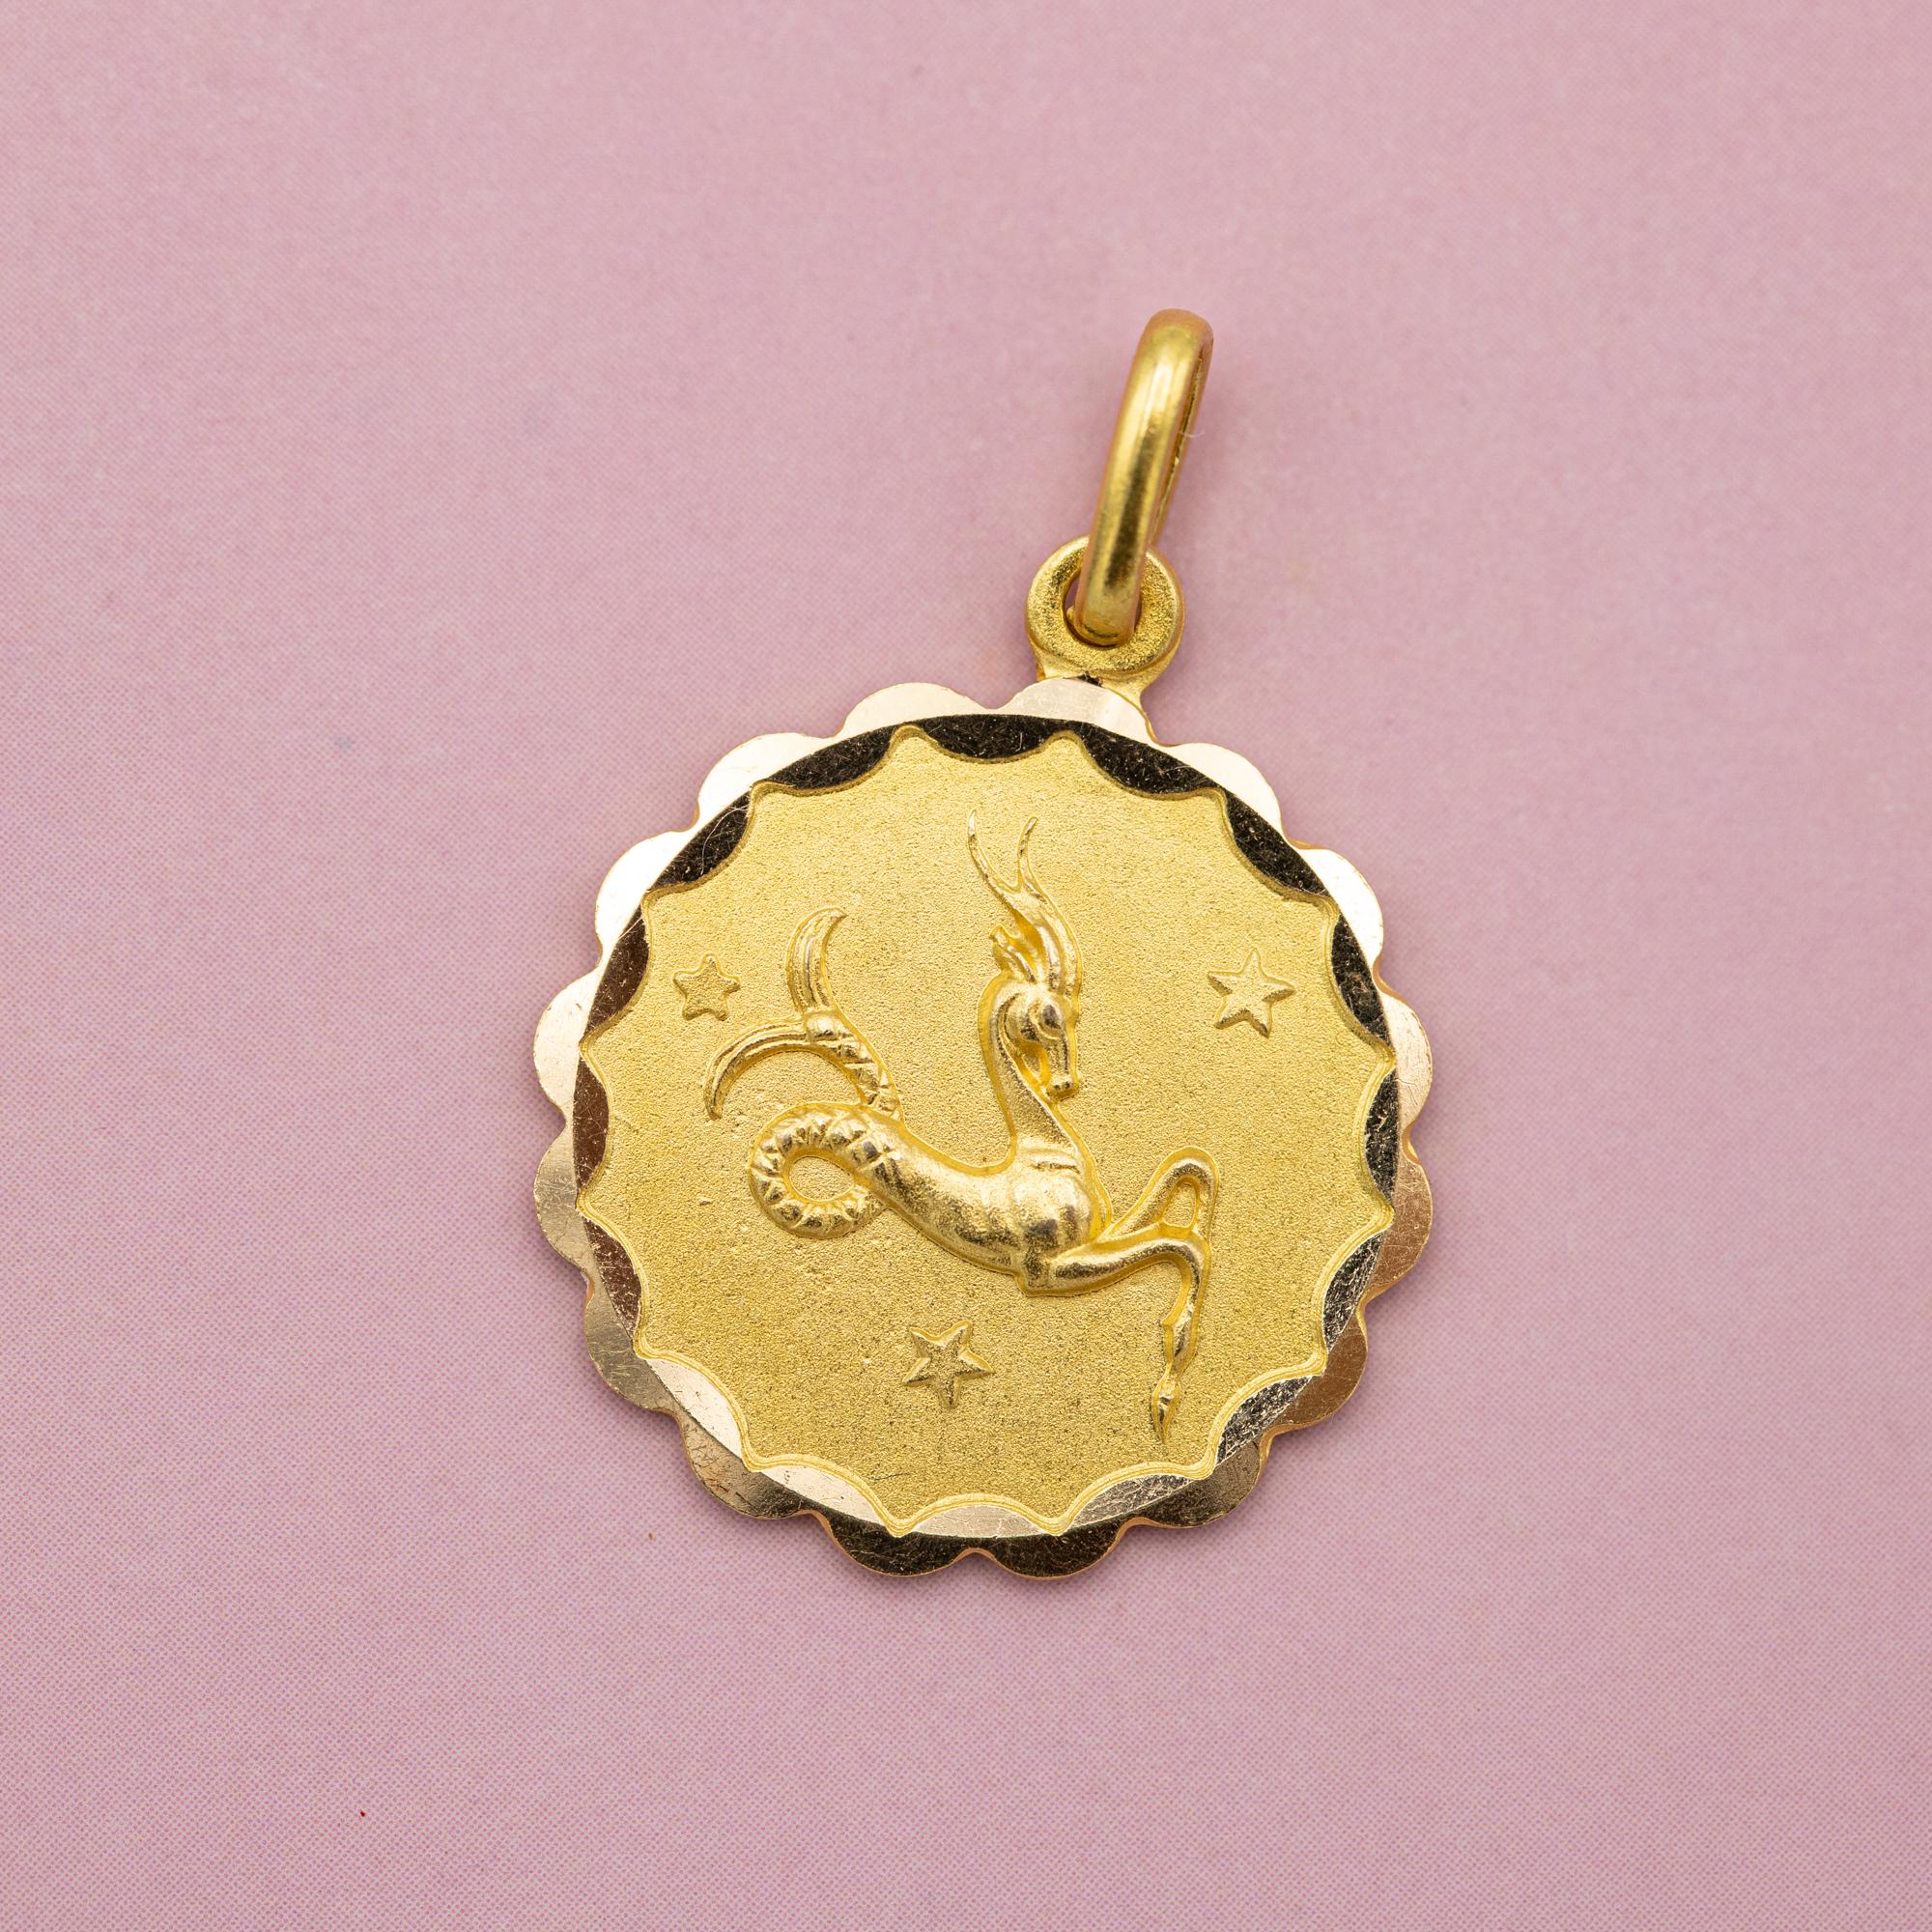 For sale is this vintage charm depicting a Capricorn, the tenth astrological sign in the zodiac. This Constellation Star Sign Pendant is associated with the birth dates between 22 December and 21 January. This pretty charm is marked with a 750 mark